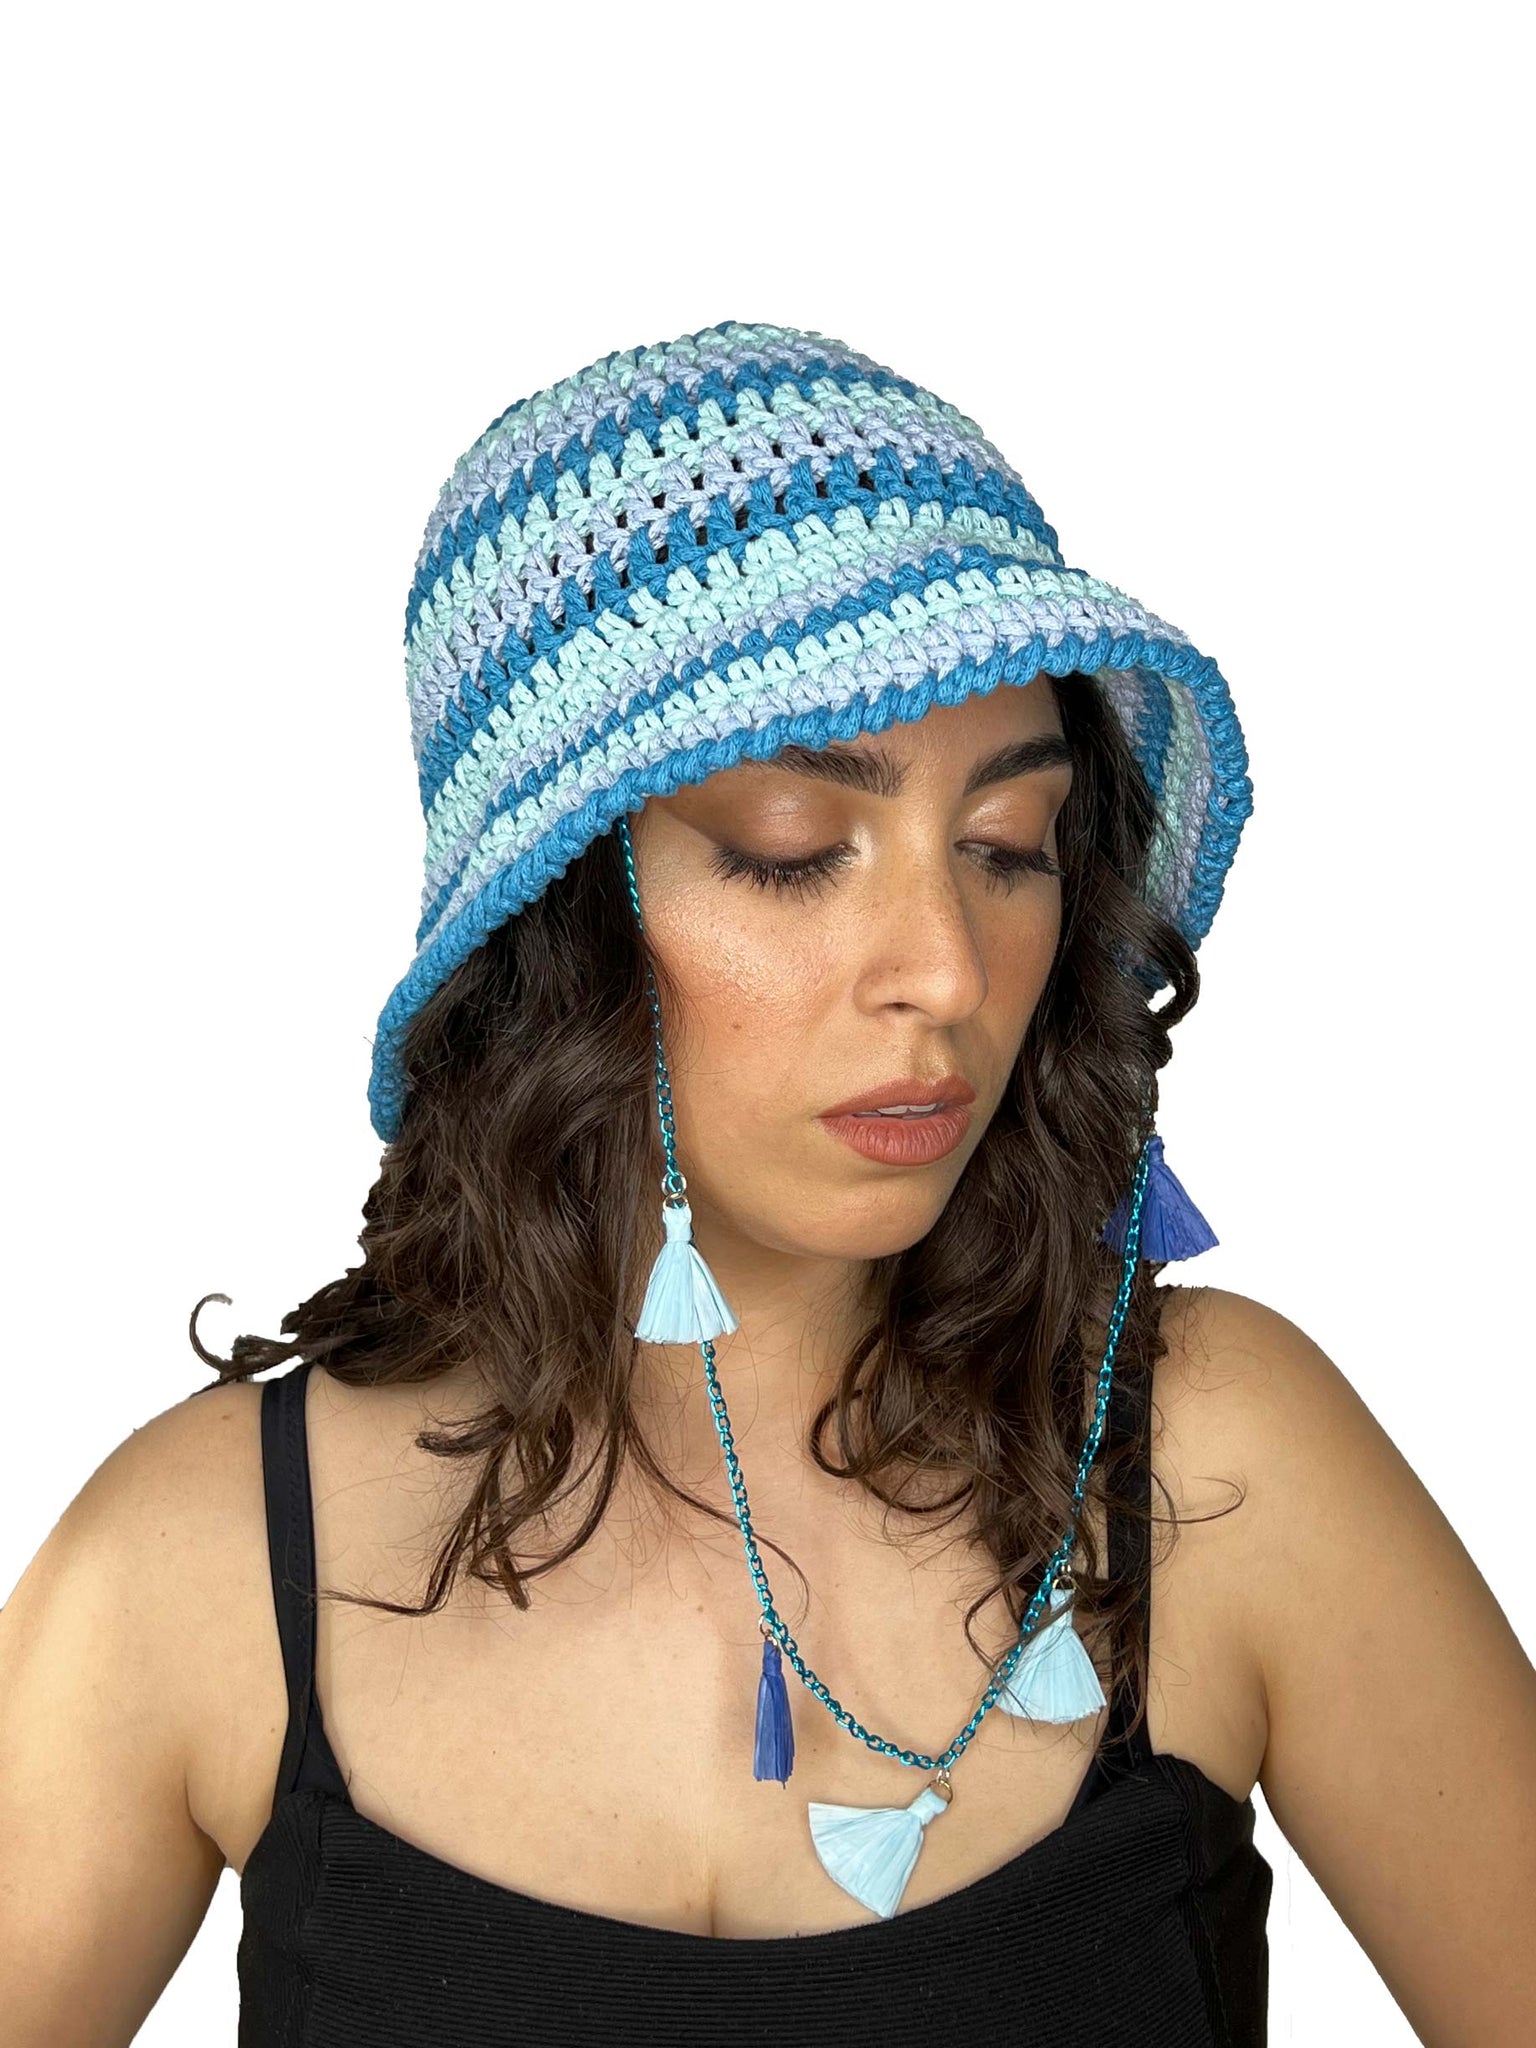 Light blue and grey striped crochet hat